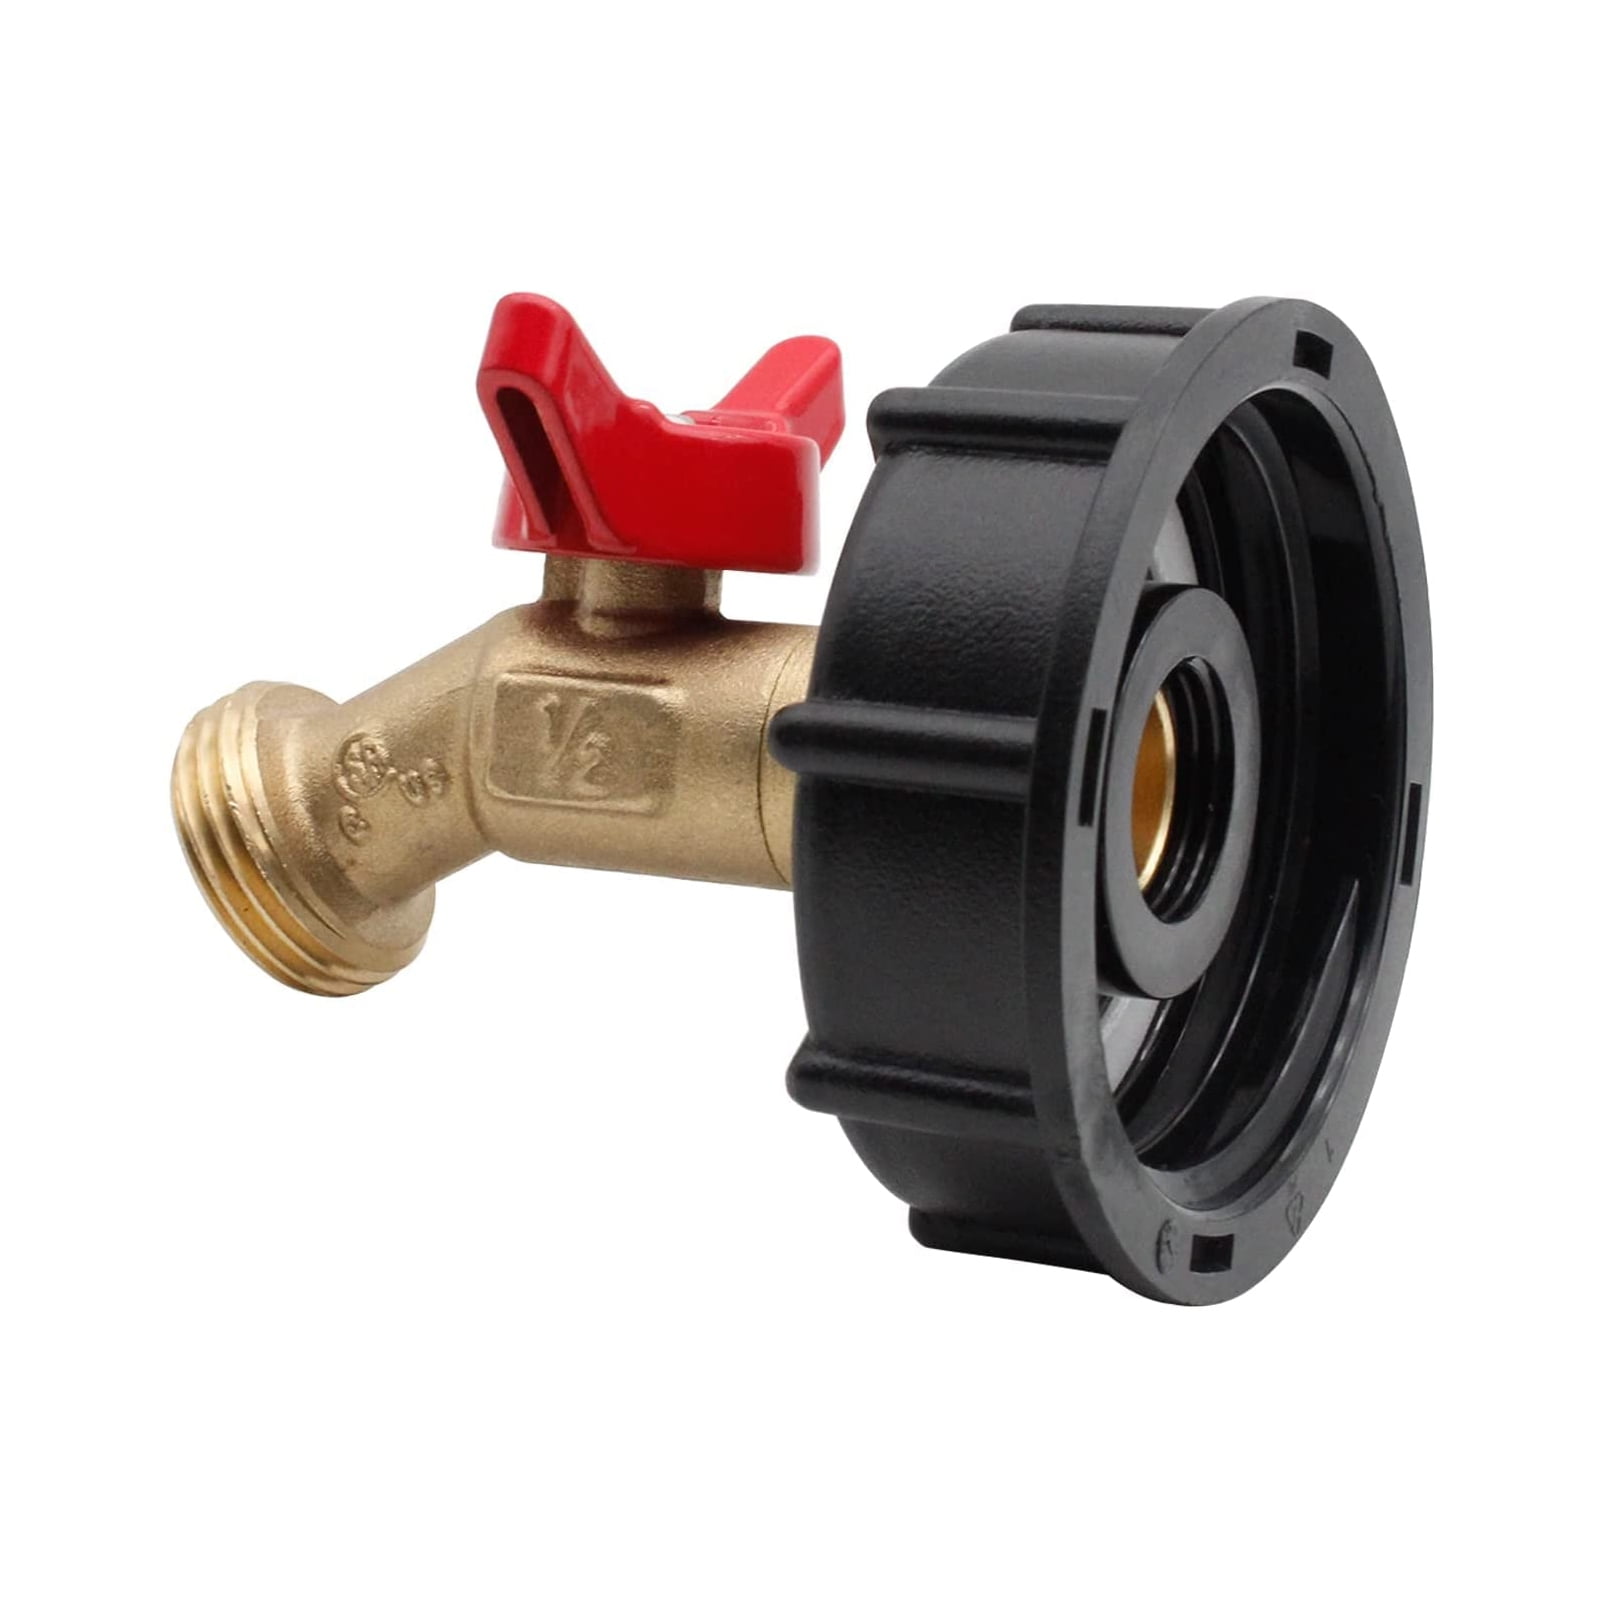 IBC Water Tank Adapter Yard Water Hose Connector 62mm Thread Adapter Fitting 